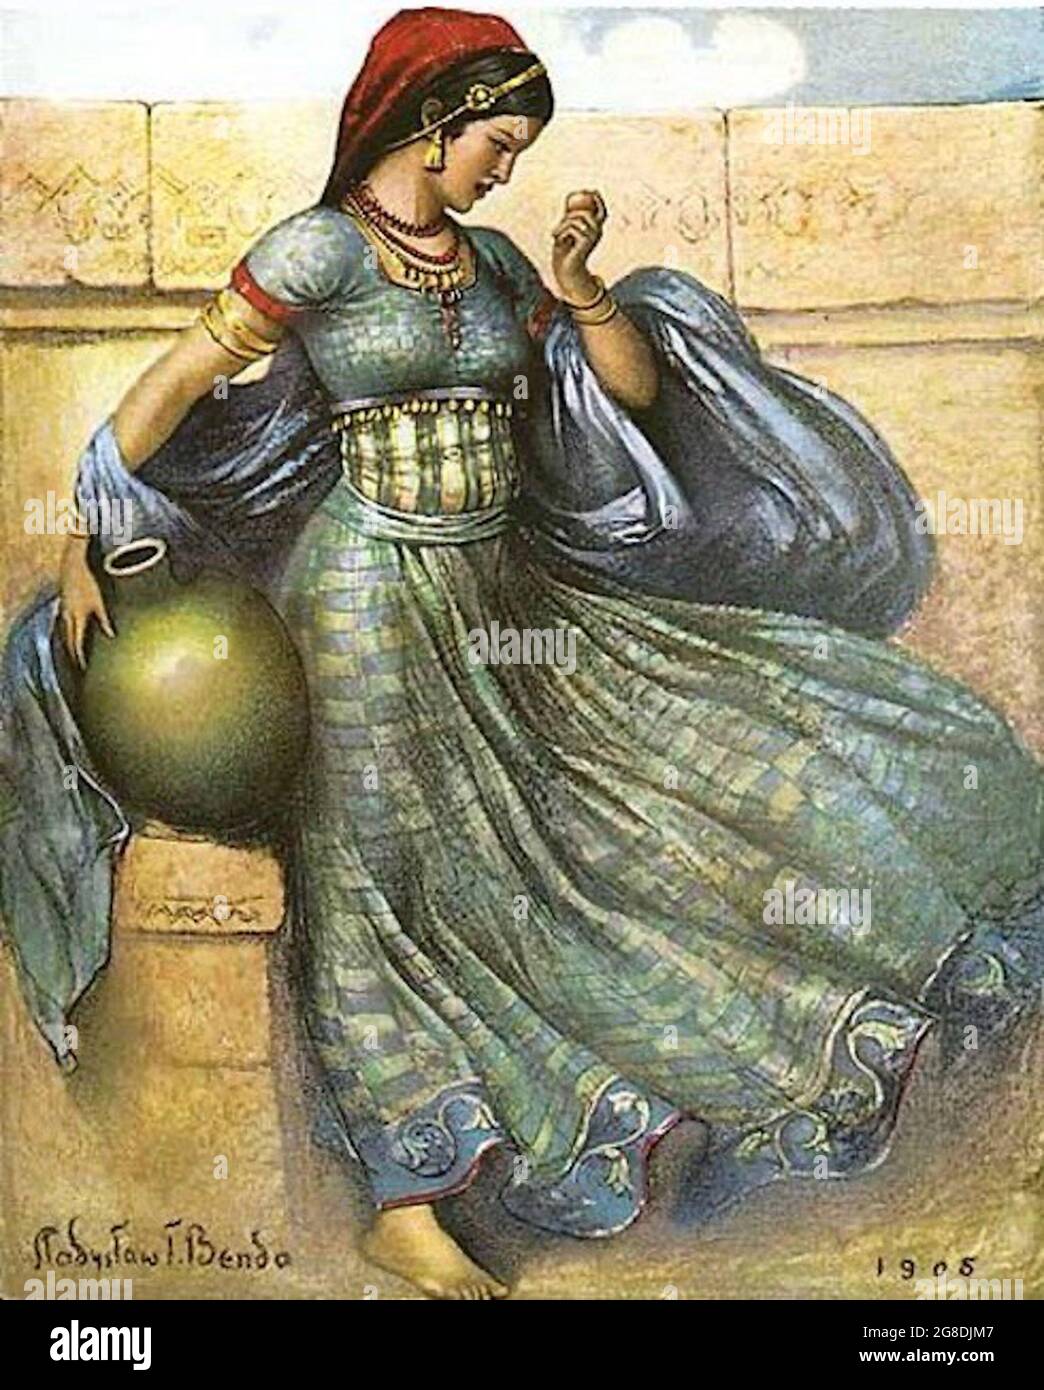 Władysław Teodor Benda artwork entitled A Pebble from India used on the front cover of The Suday Magazine of the New York Tribune. Traditional dress. Stock Photo